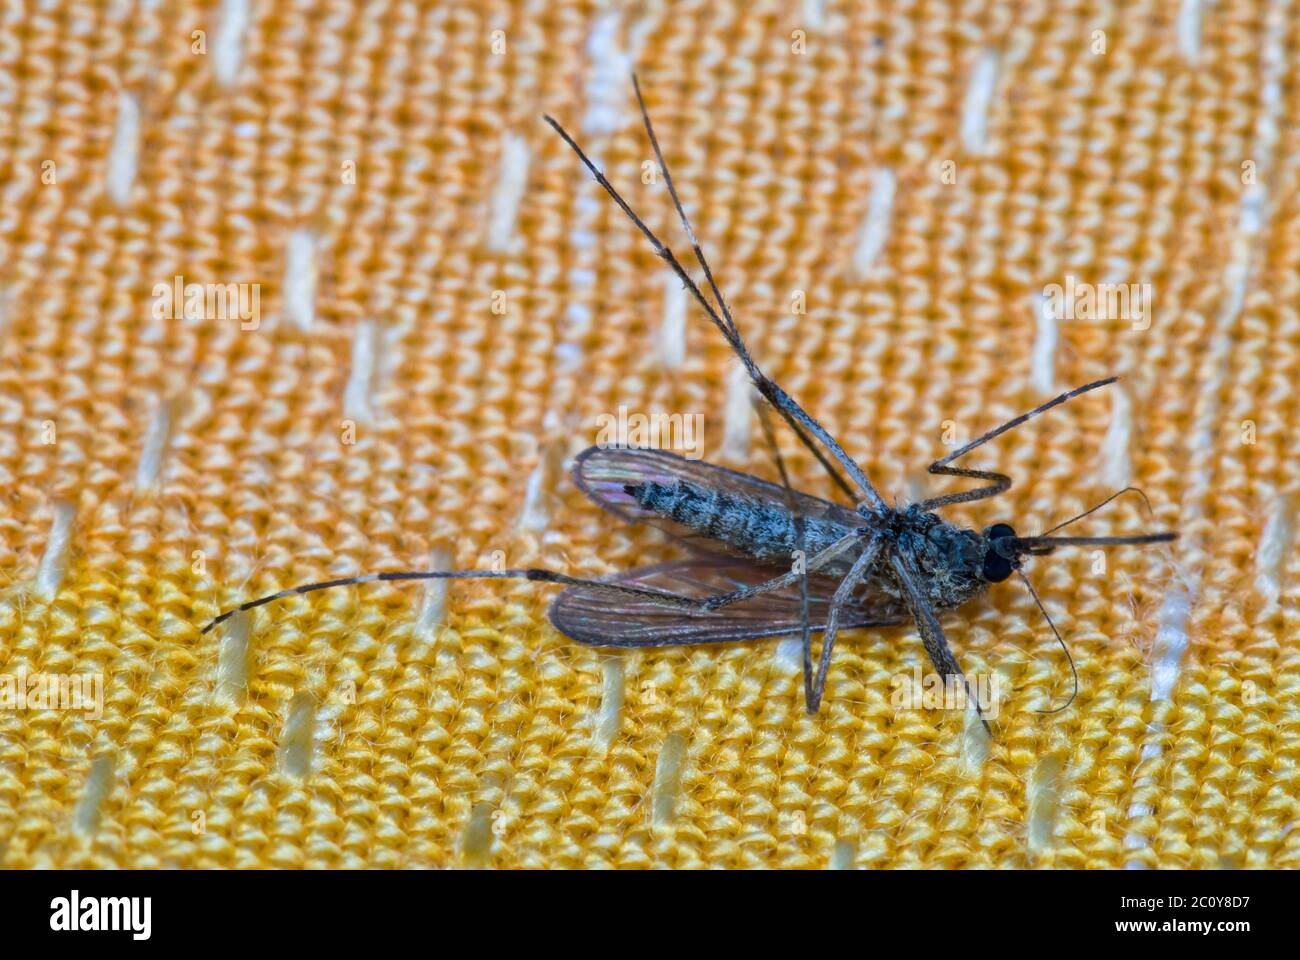 dead mosquito on orange fabric background laying on its back Stock Photo